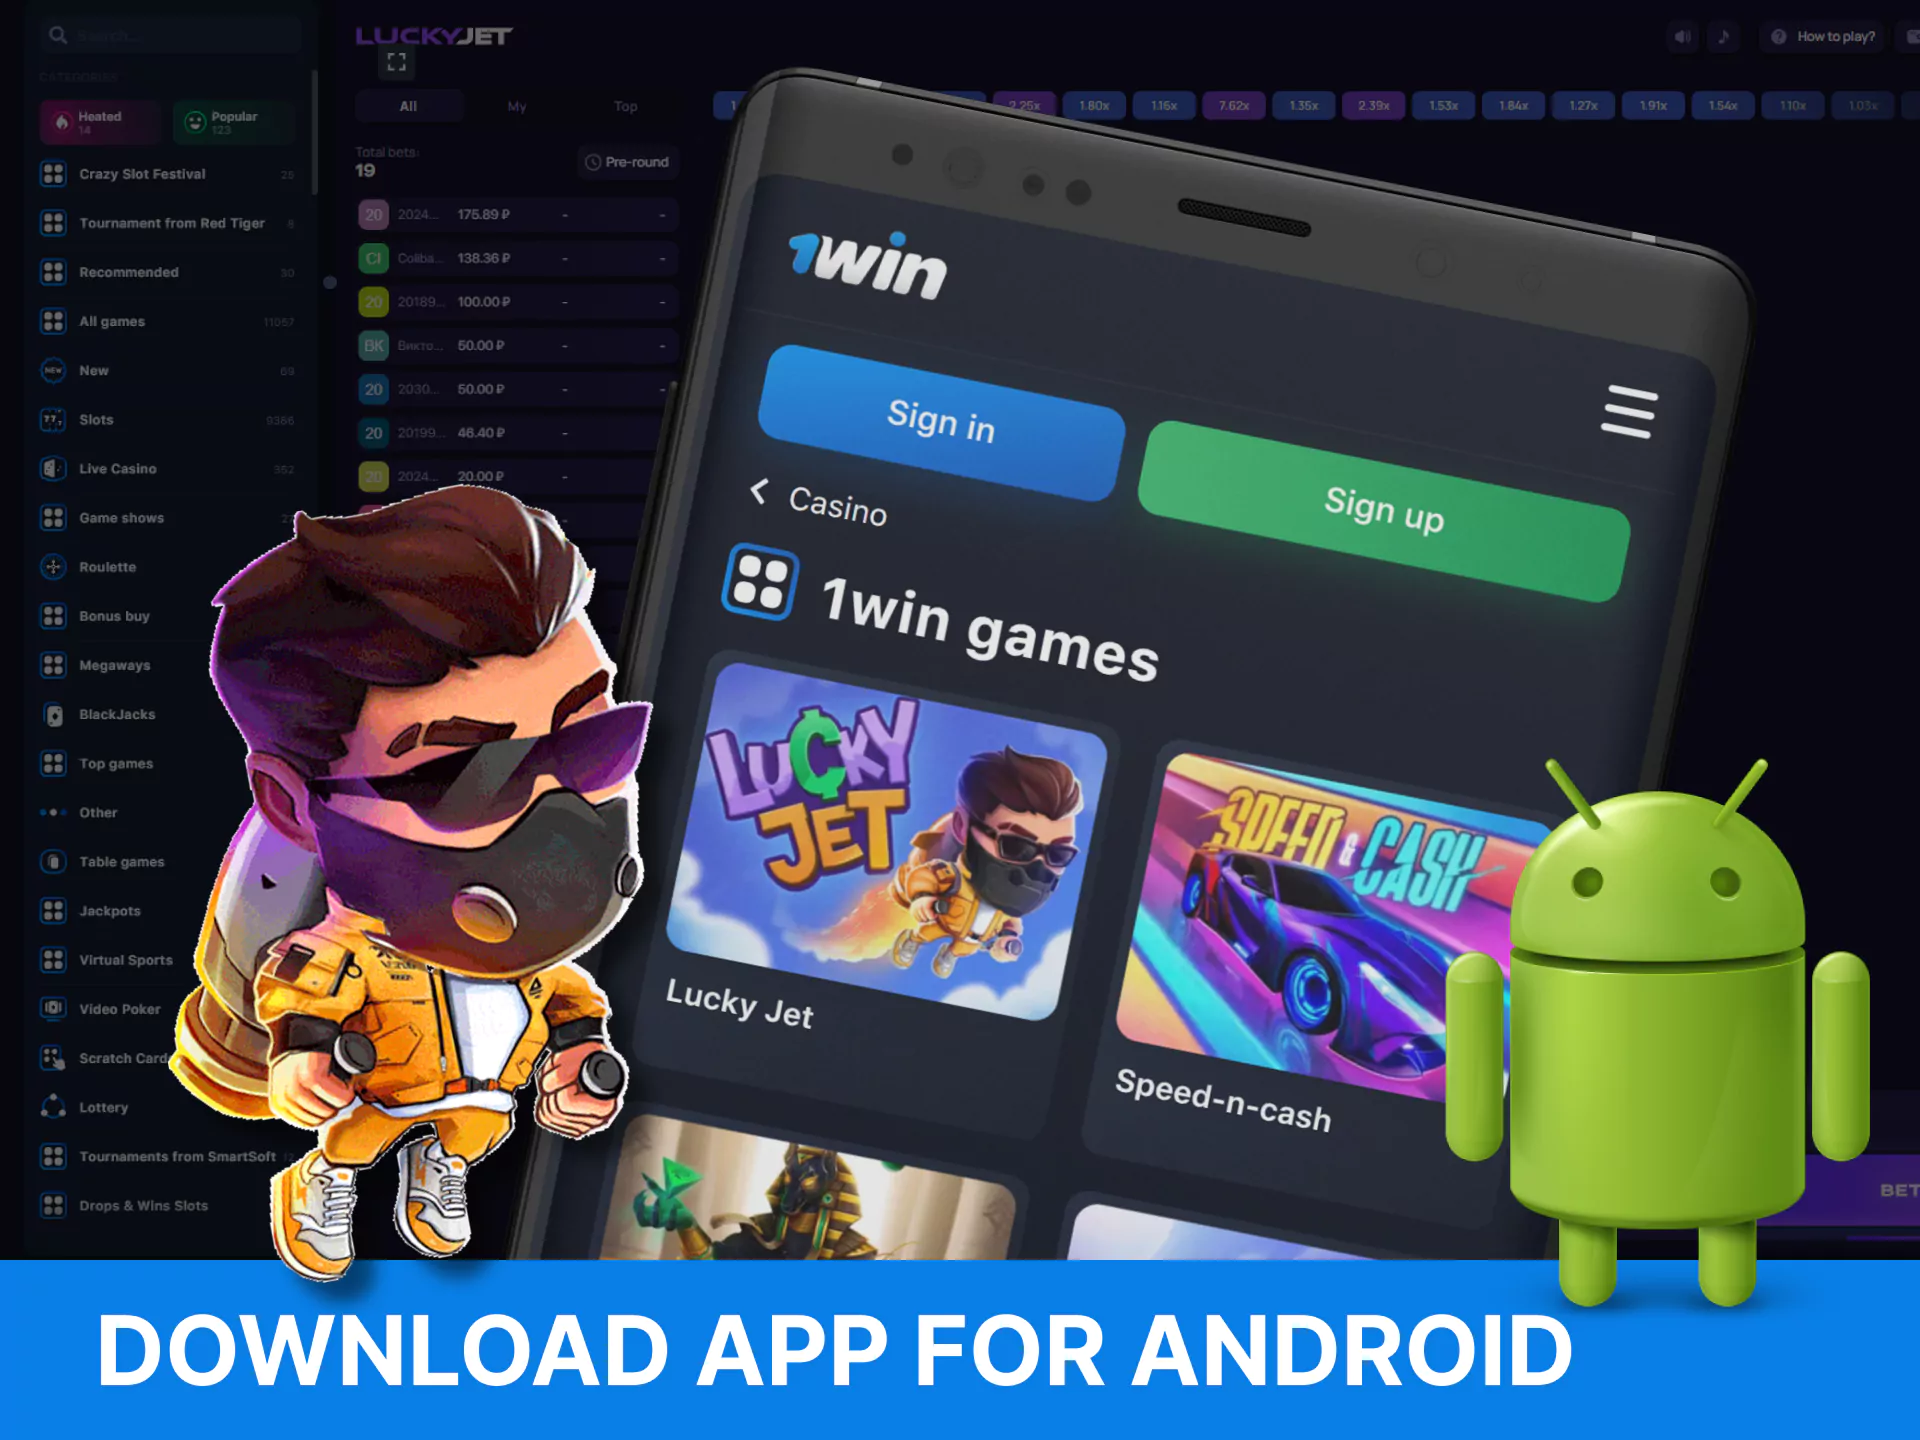 Download and install the app from 1Win to play Lucky Jet on your Android device.